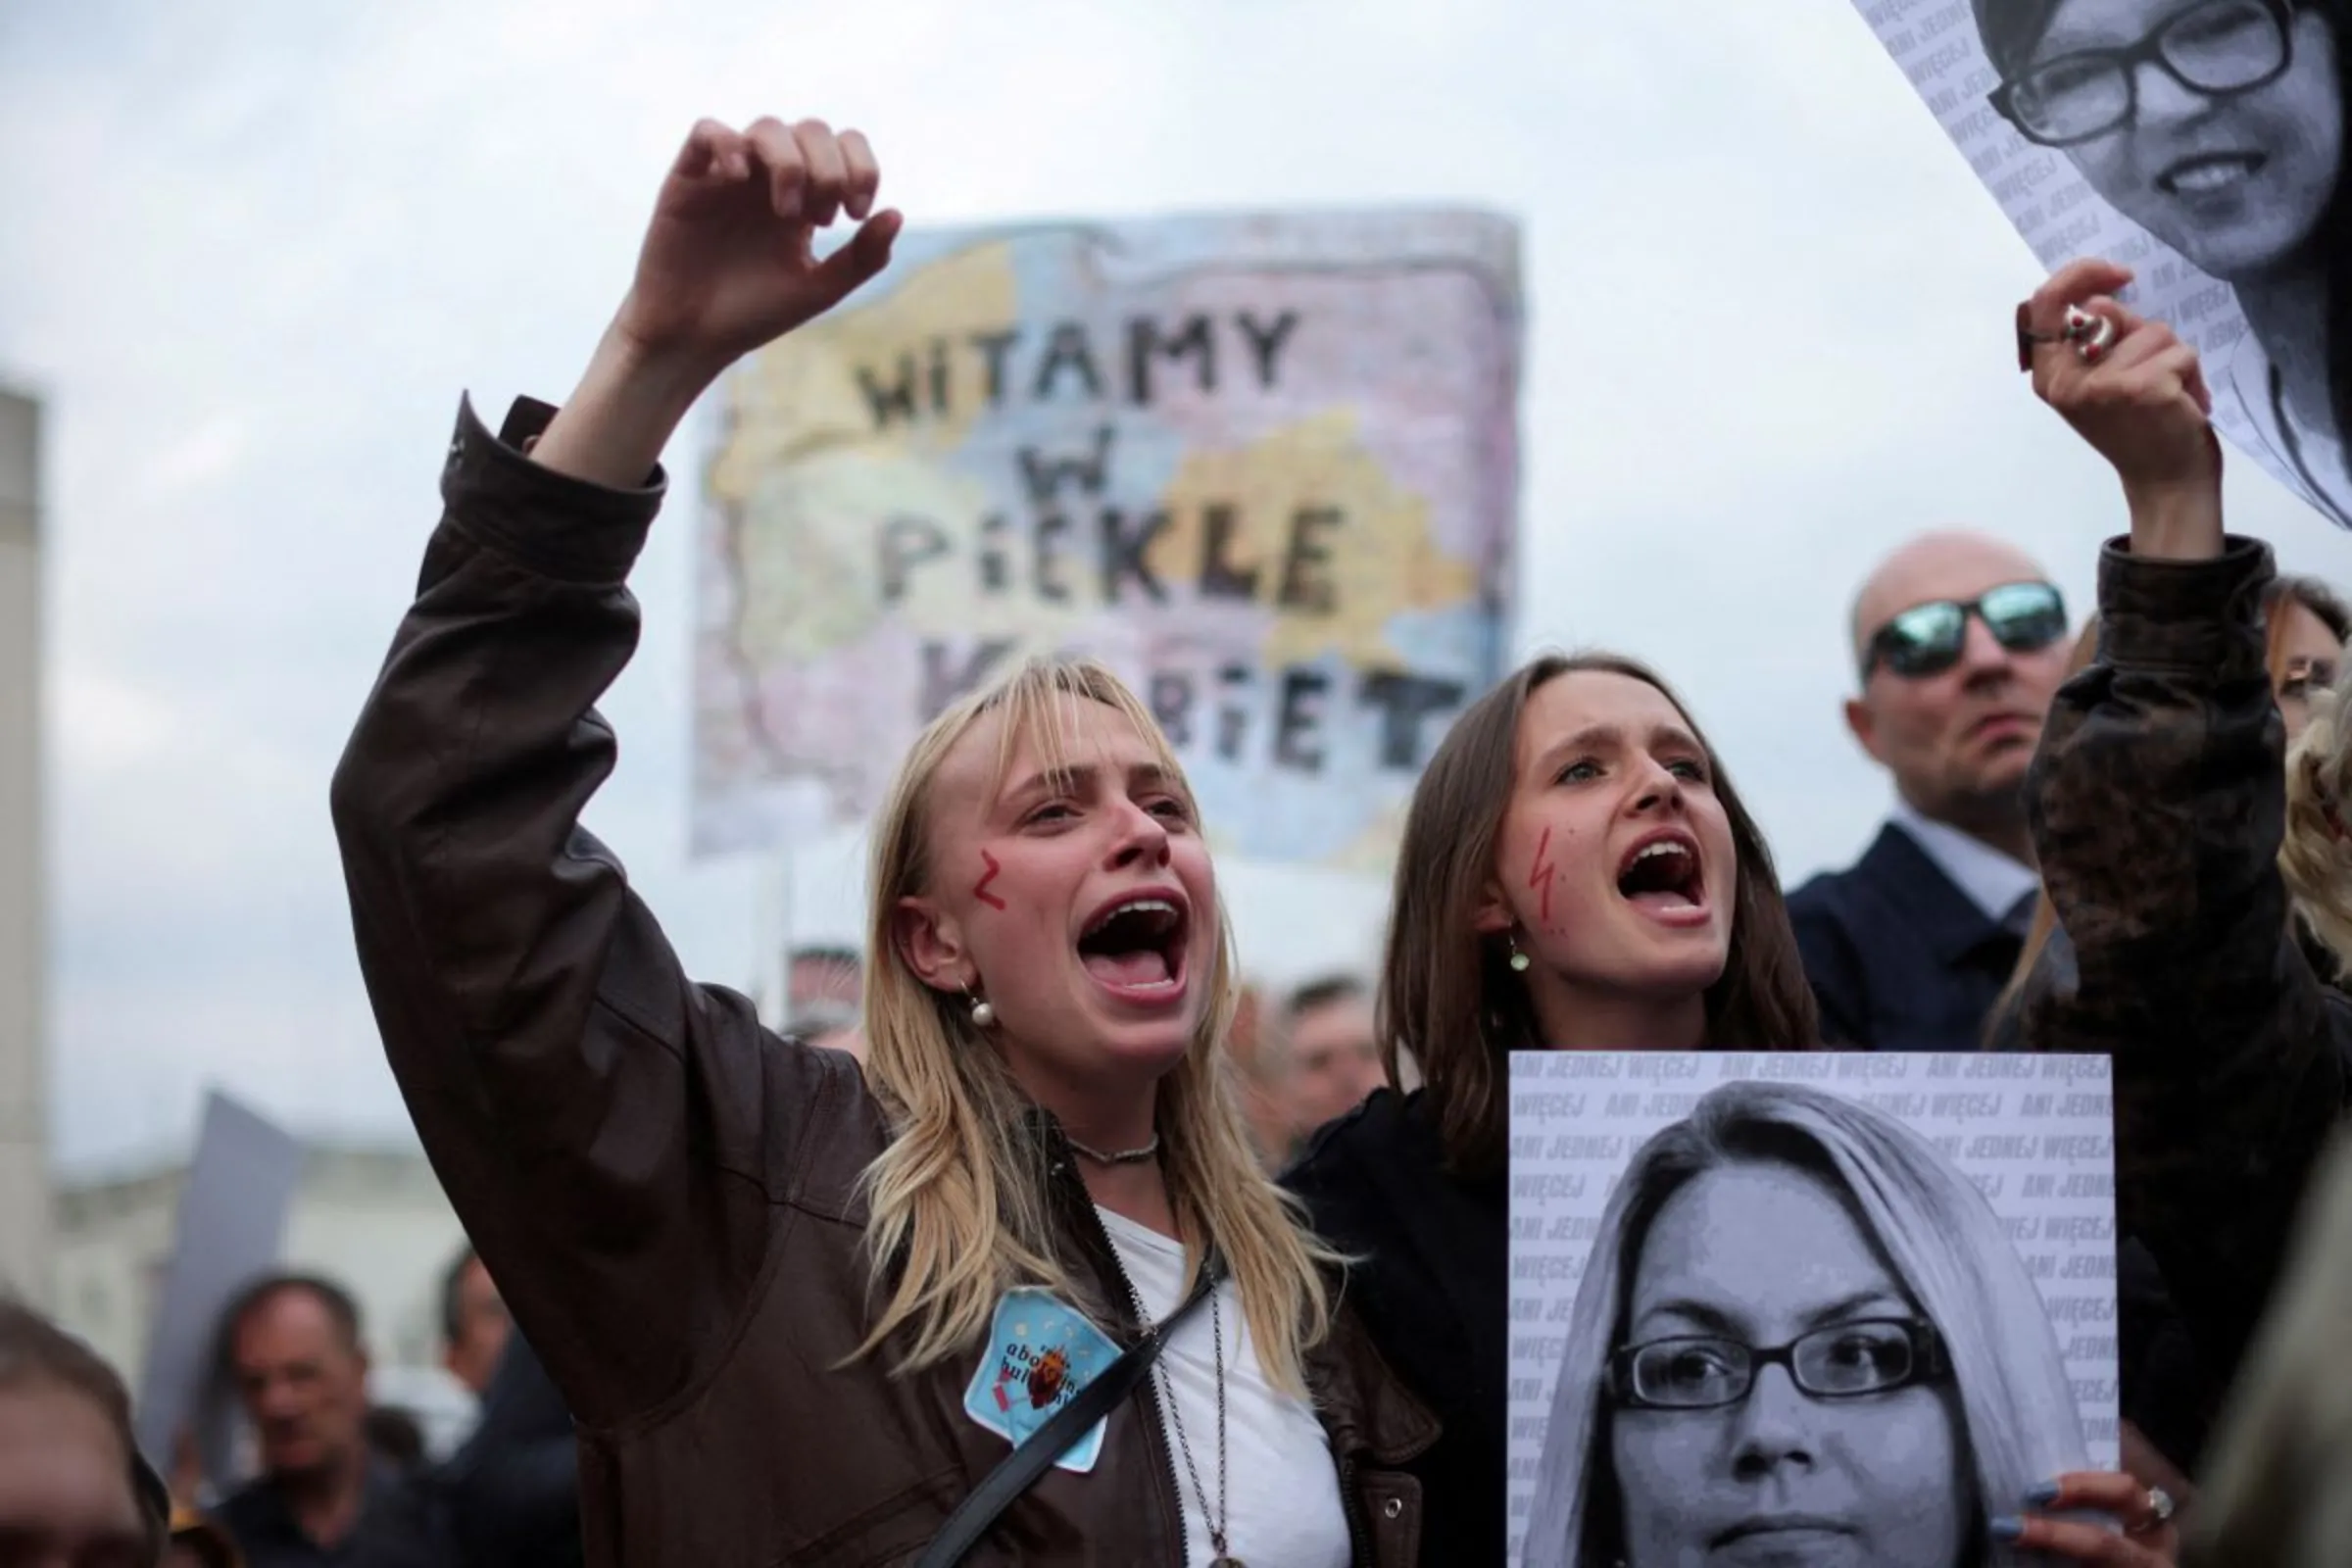 Women take part in a protest, after a pregnant woman died in hospital in an incident campaigners say is the fault of Poland's laws on abortion, which are some of the most restrictive in Europe, in Warsaw, Poland June 14, 2023. REUTERS/Kacper Pempel